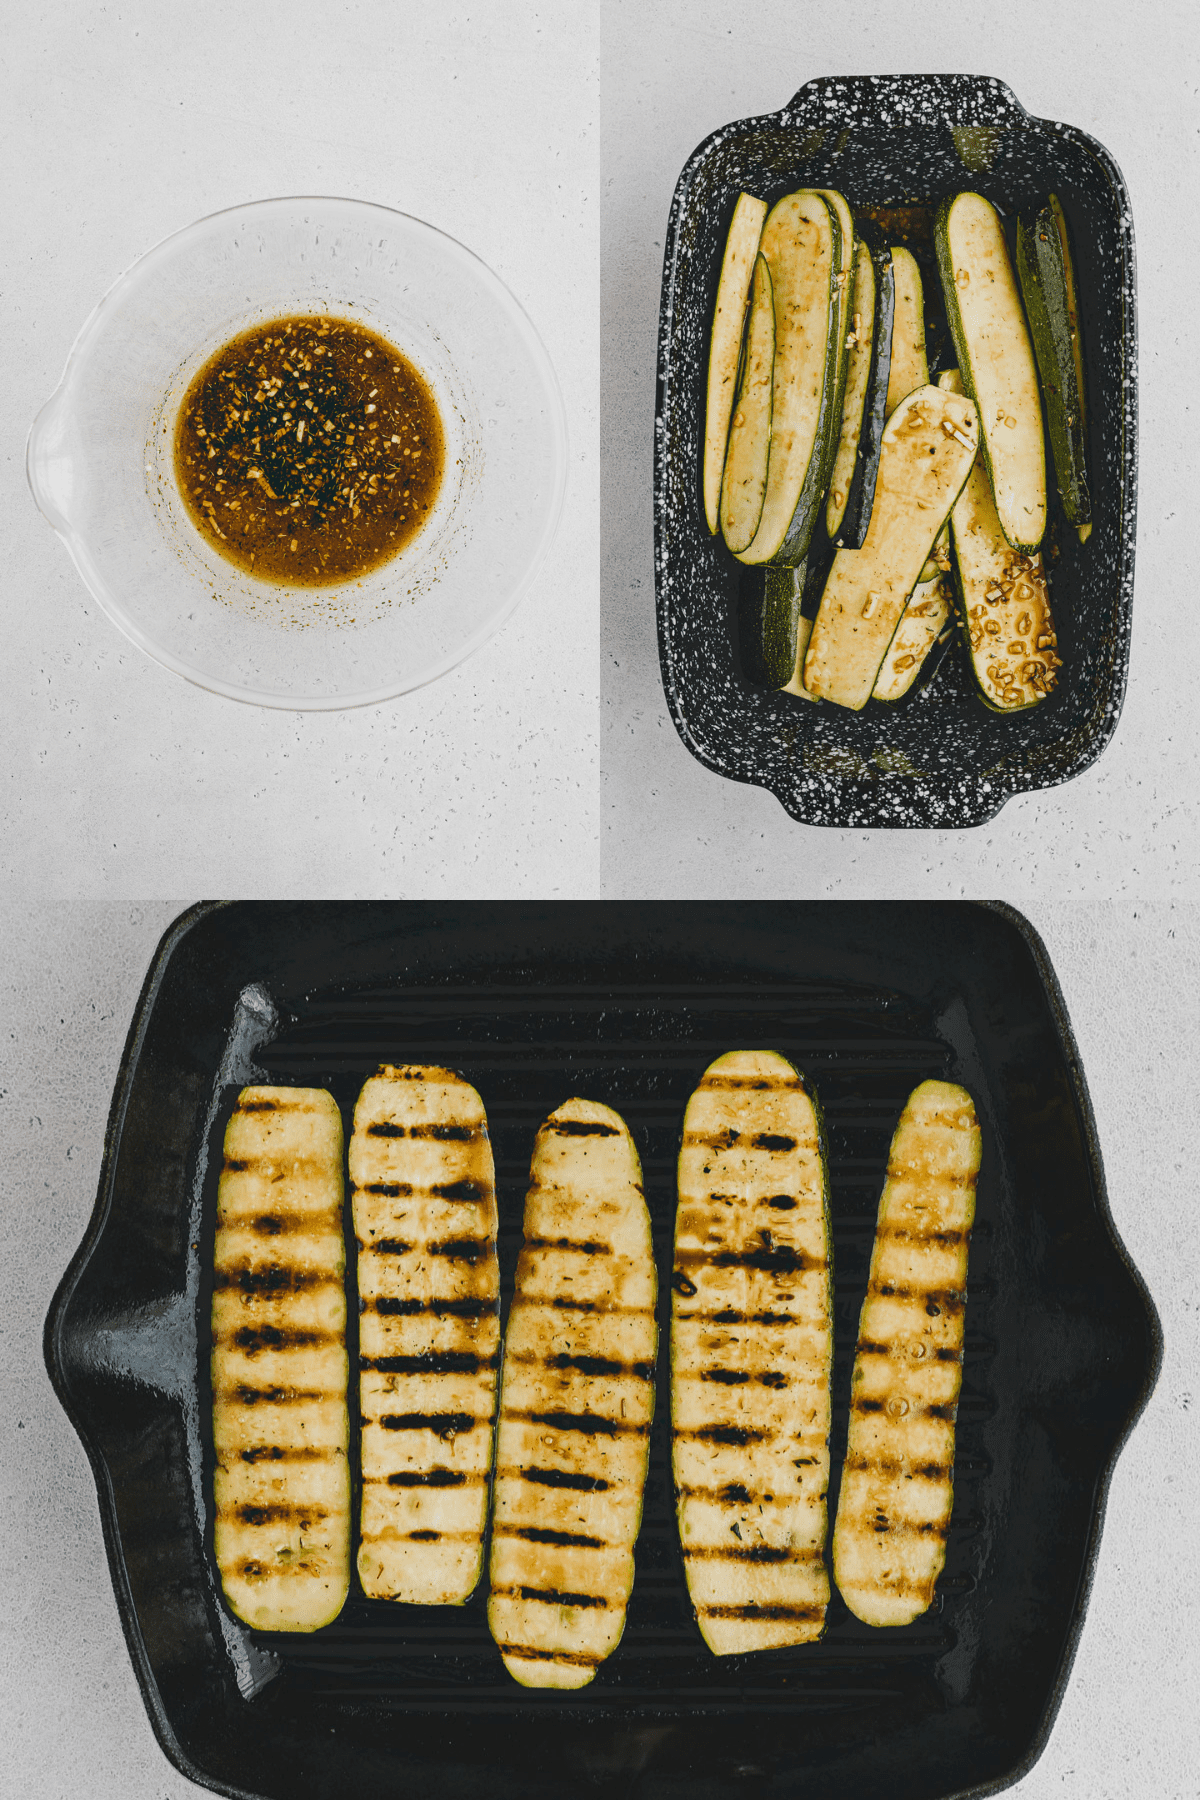 Three pictures from top view. Top left photo is  of a small glass bowl with the marinade in it, top right is the zucchini slices in a small dish coated in the marinade, bottom picture is of a grill pan with zucchini slices laid out on it with grill marks perpendicular to the slices. 